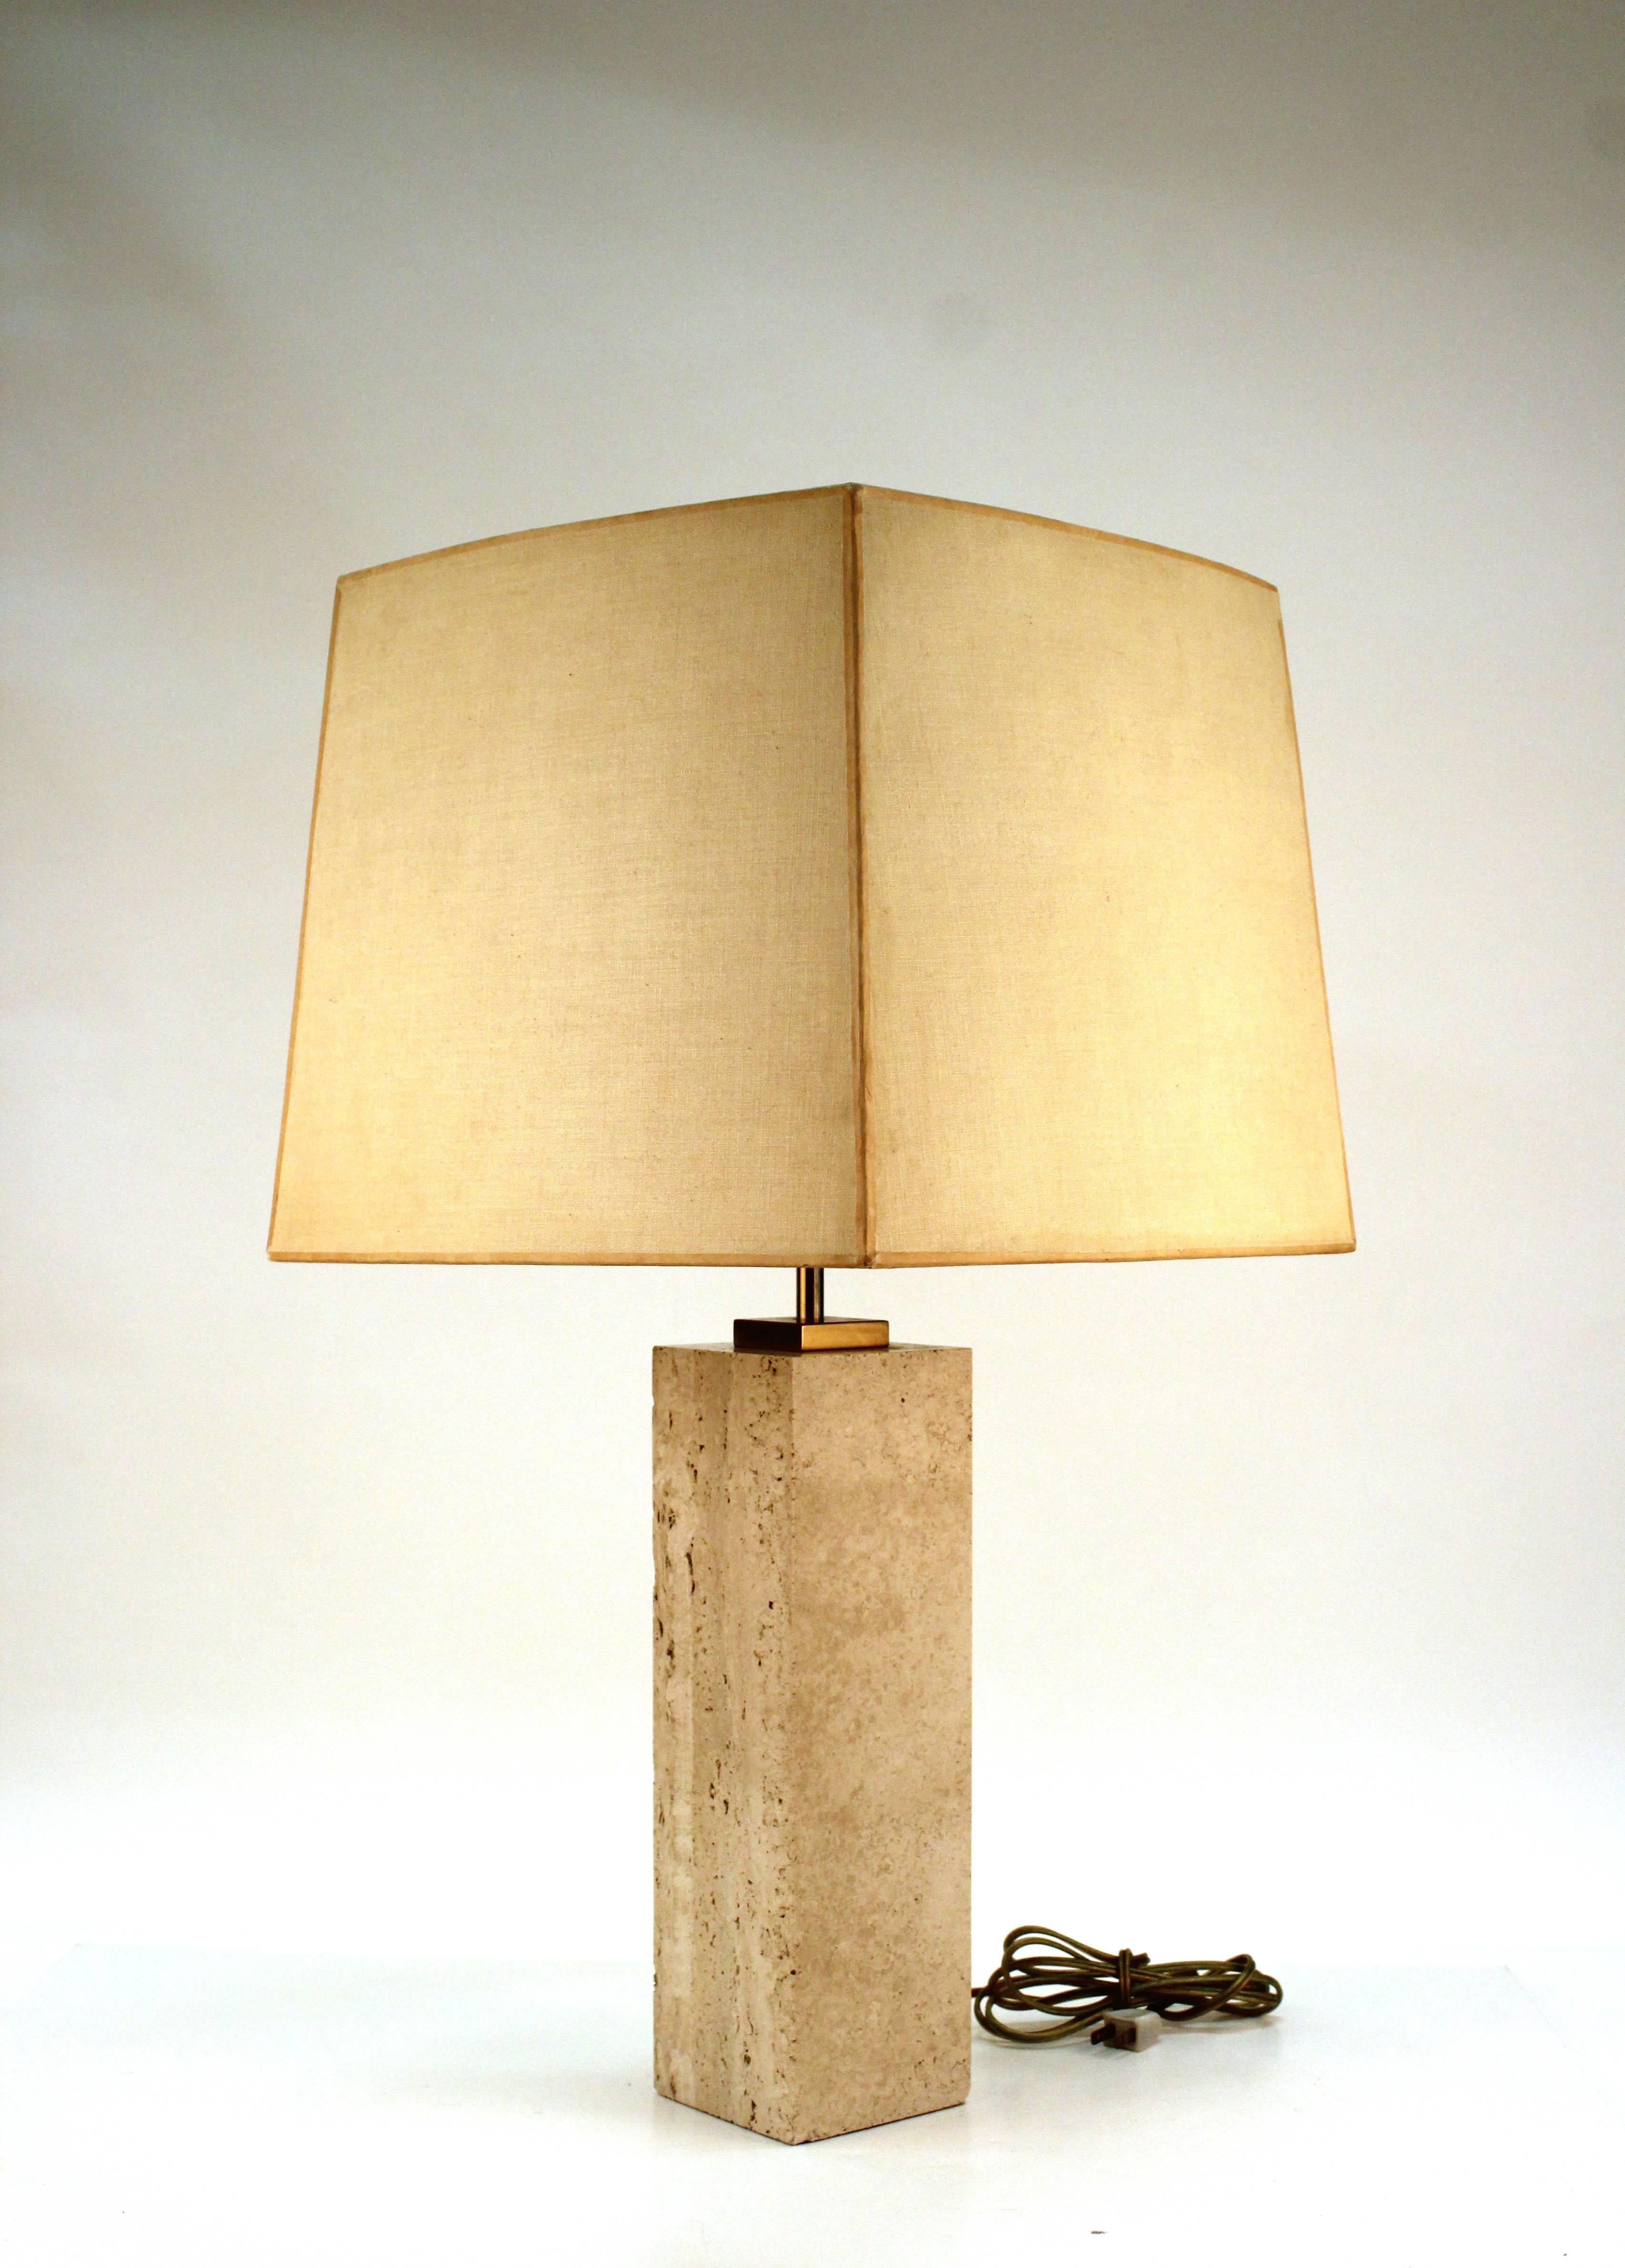 Travertine table lamp with brass detailing by Robsjohn-Gibbings. Includes the original shade which is in need of refurbishing. Despite two fleabite nicks on the base the lamp remains in very good condition.